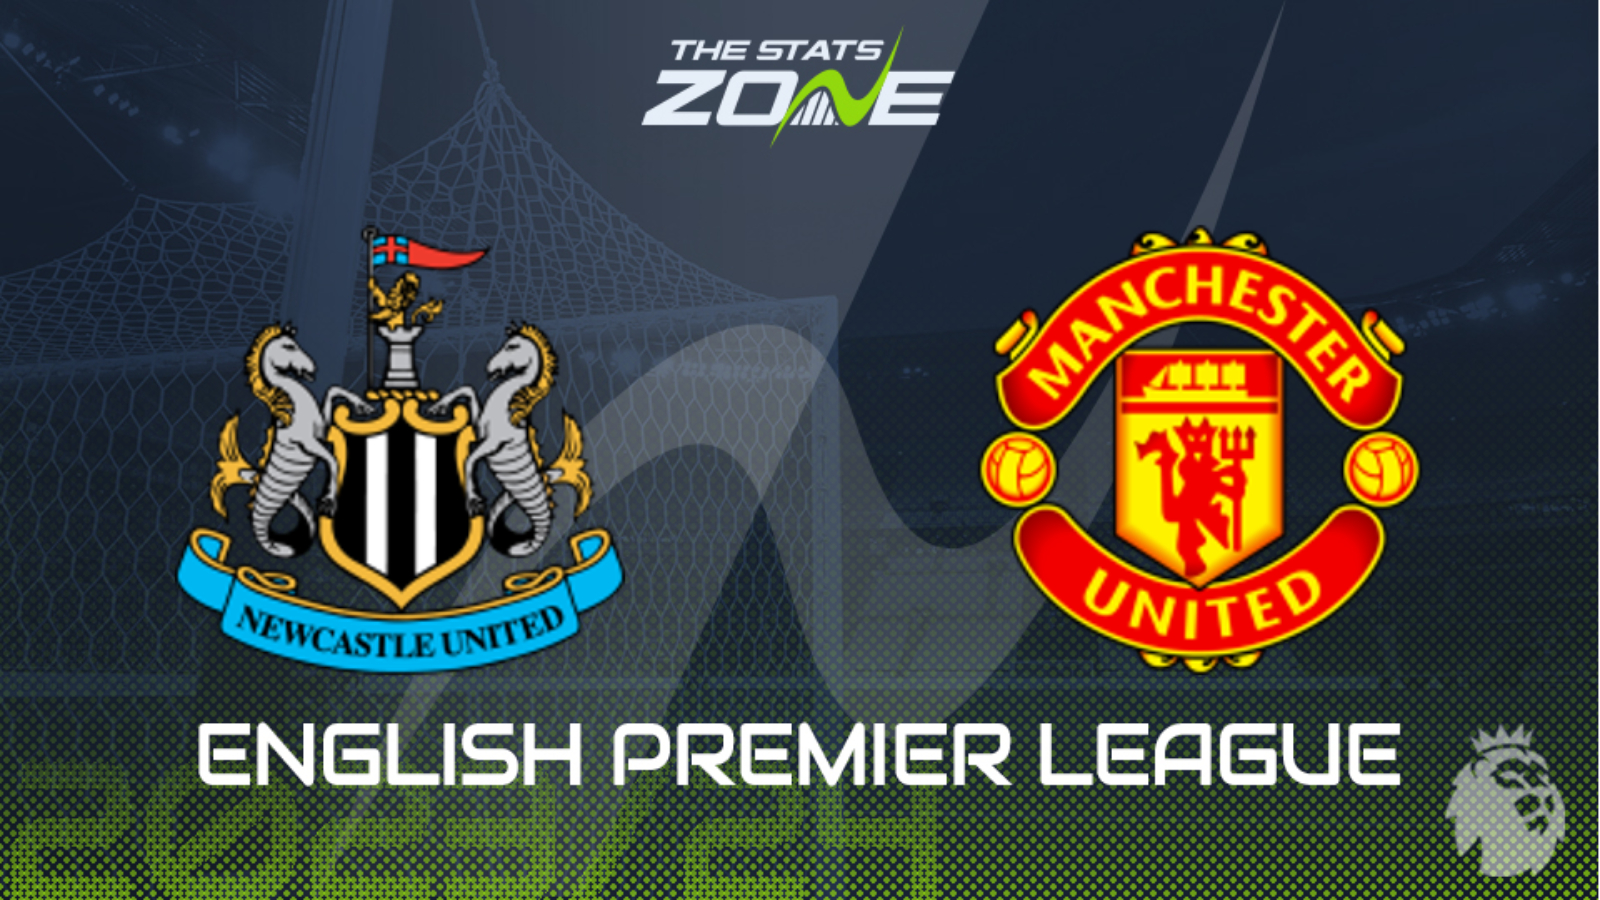 1860 Munich vs Newcastle United Prediction and Betting Tips, 15th July